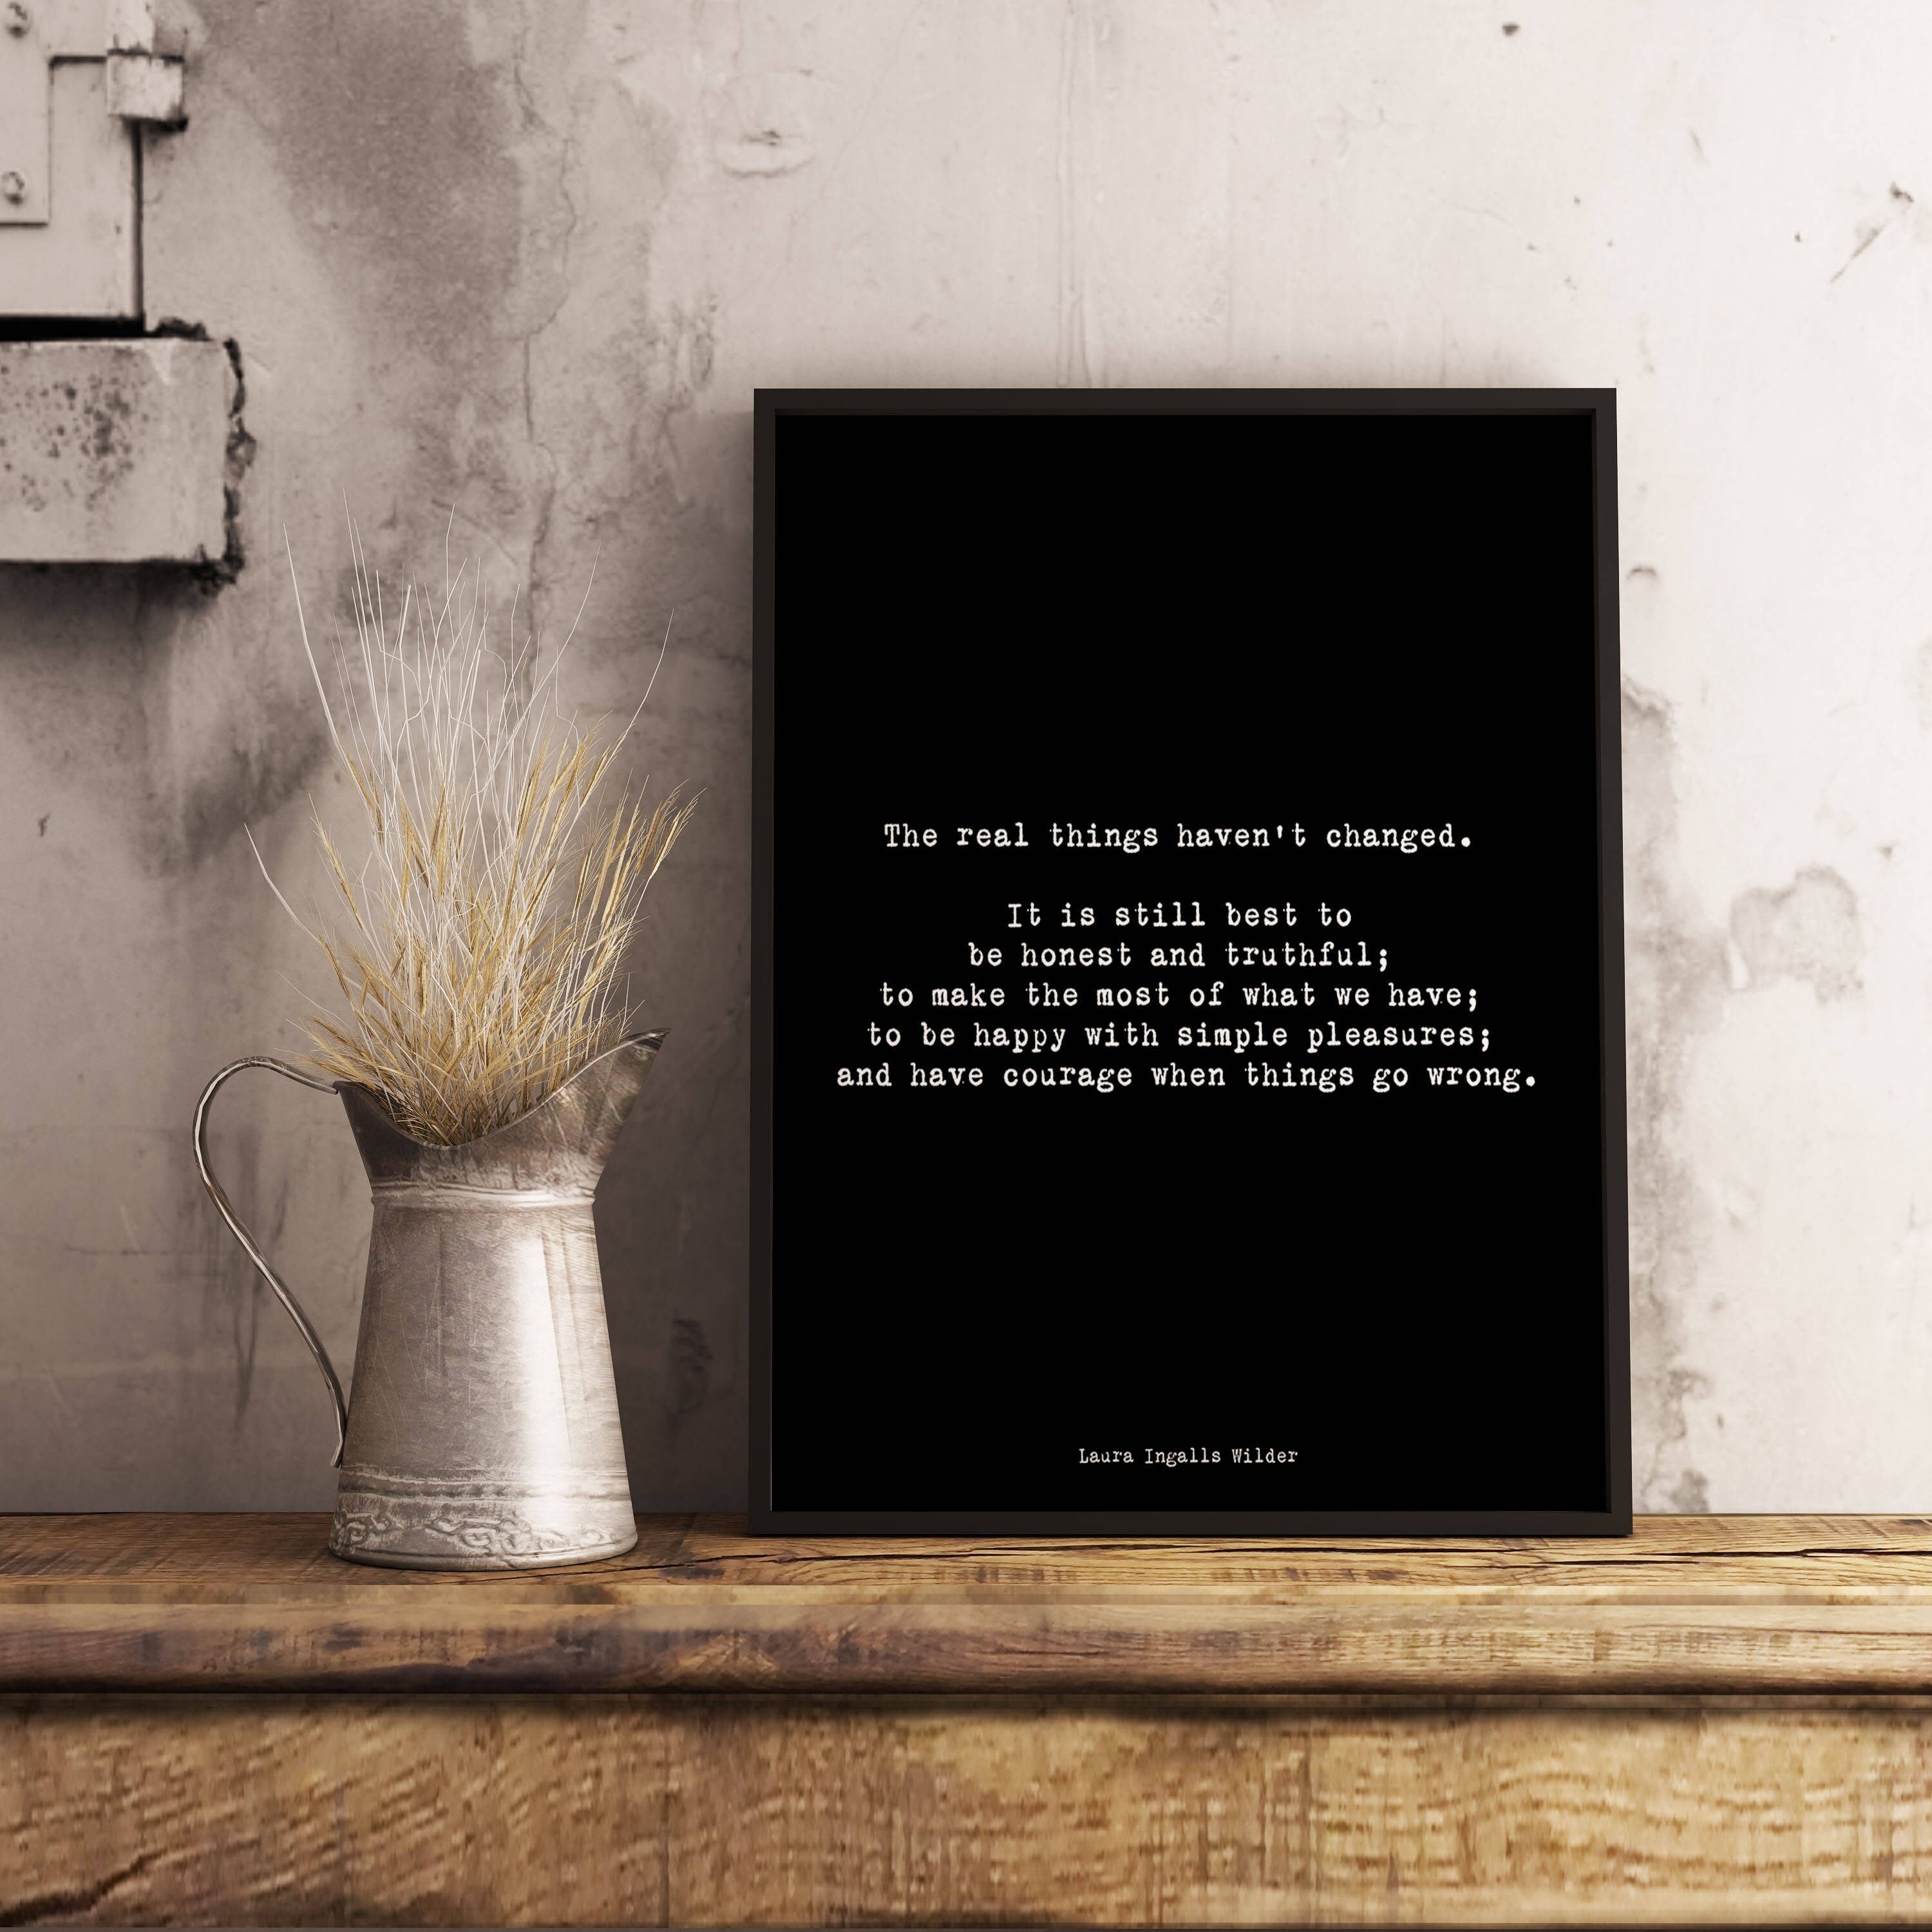 Laura Ingalls Wilder Inspirational Quote Framed Art In Black & White, The Real Things Haven't Changed